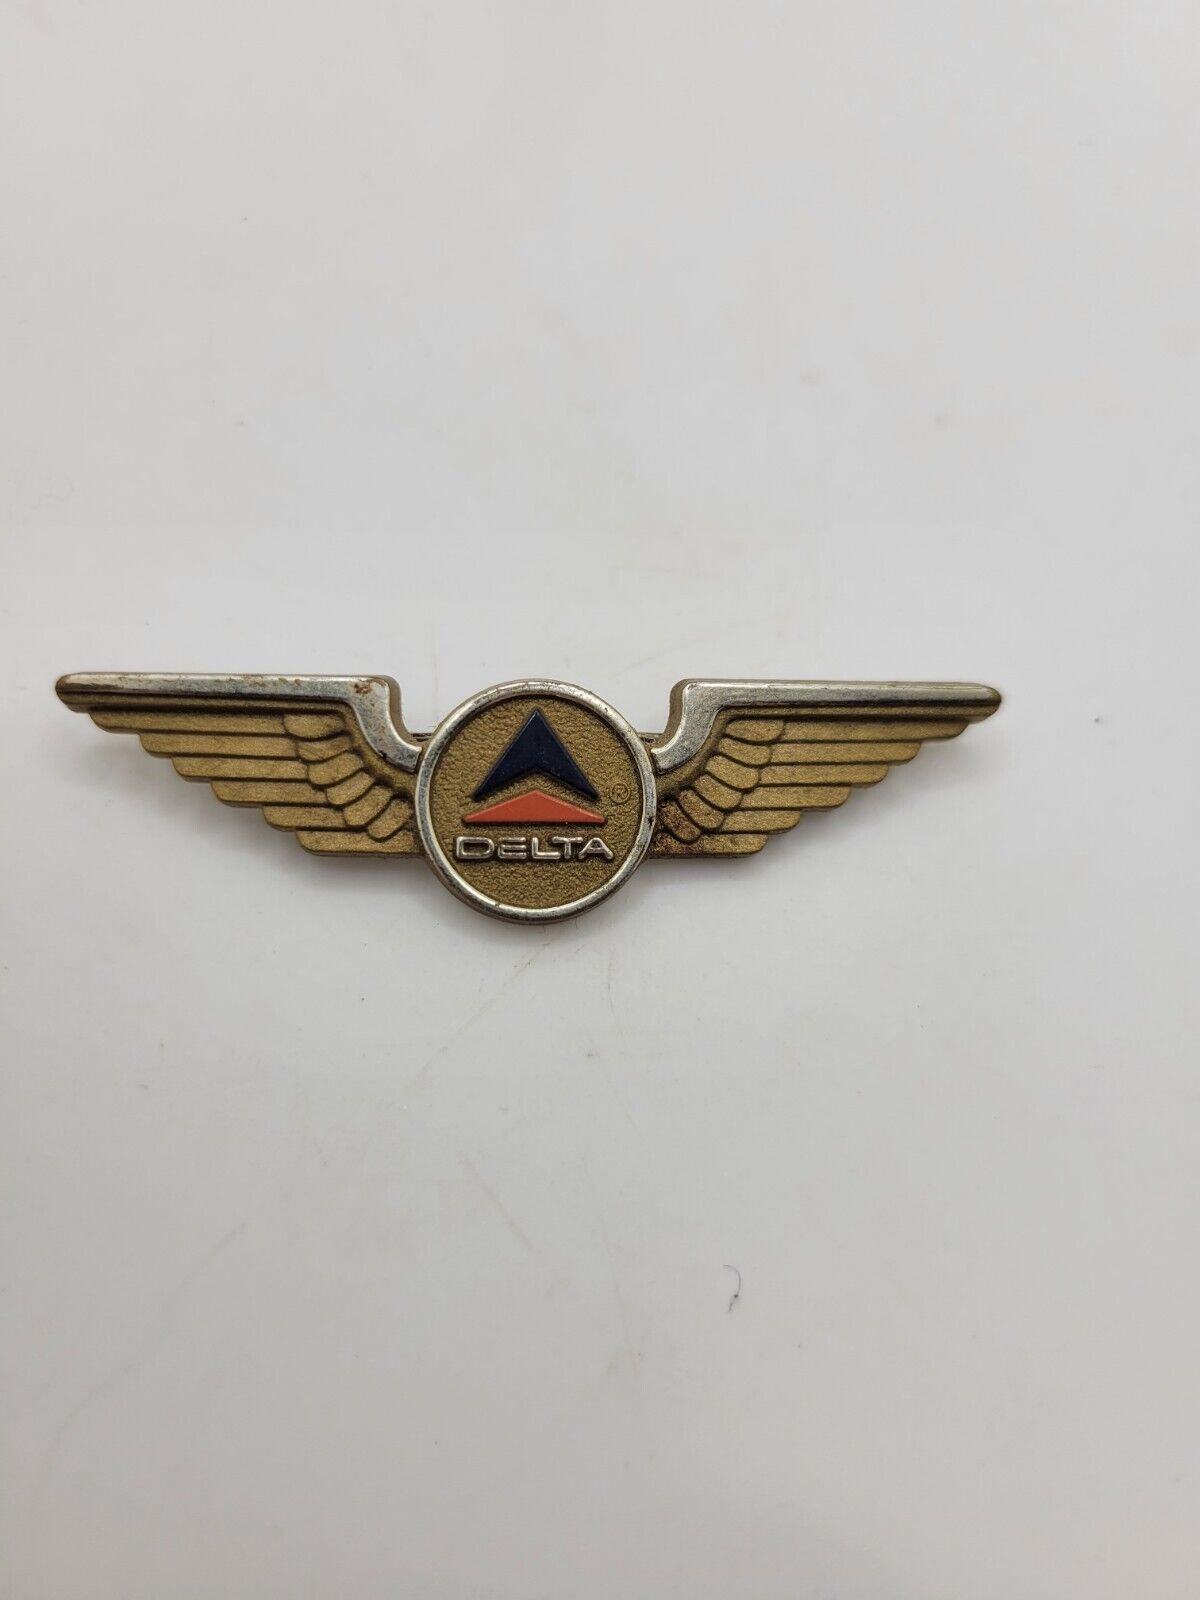 Vintage Delta Airlines Wings Pins Stoffel Seals Tukahoe NY Gold Plastic Wings 